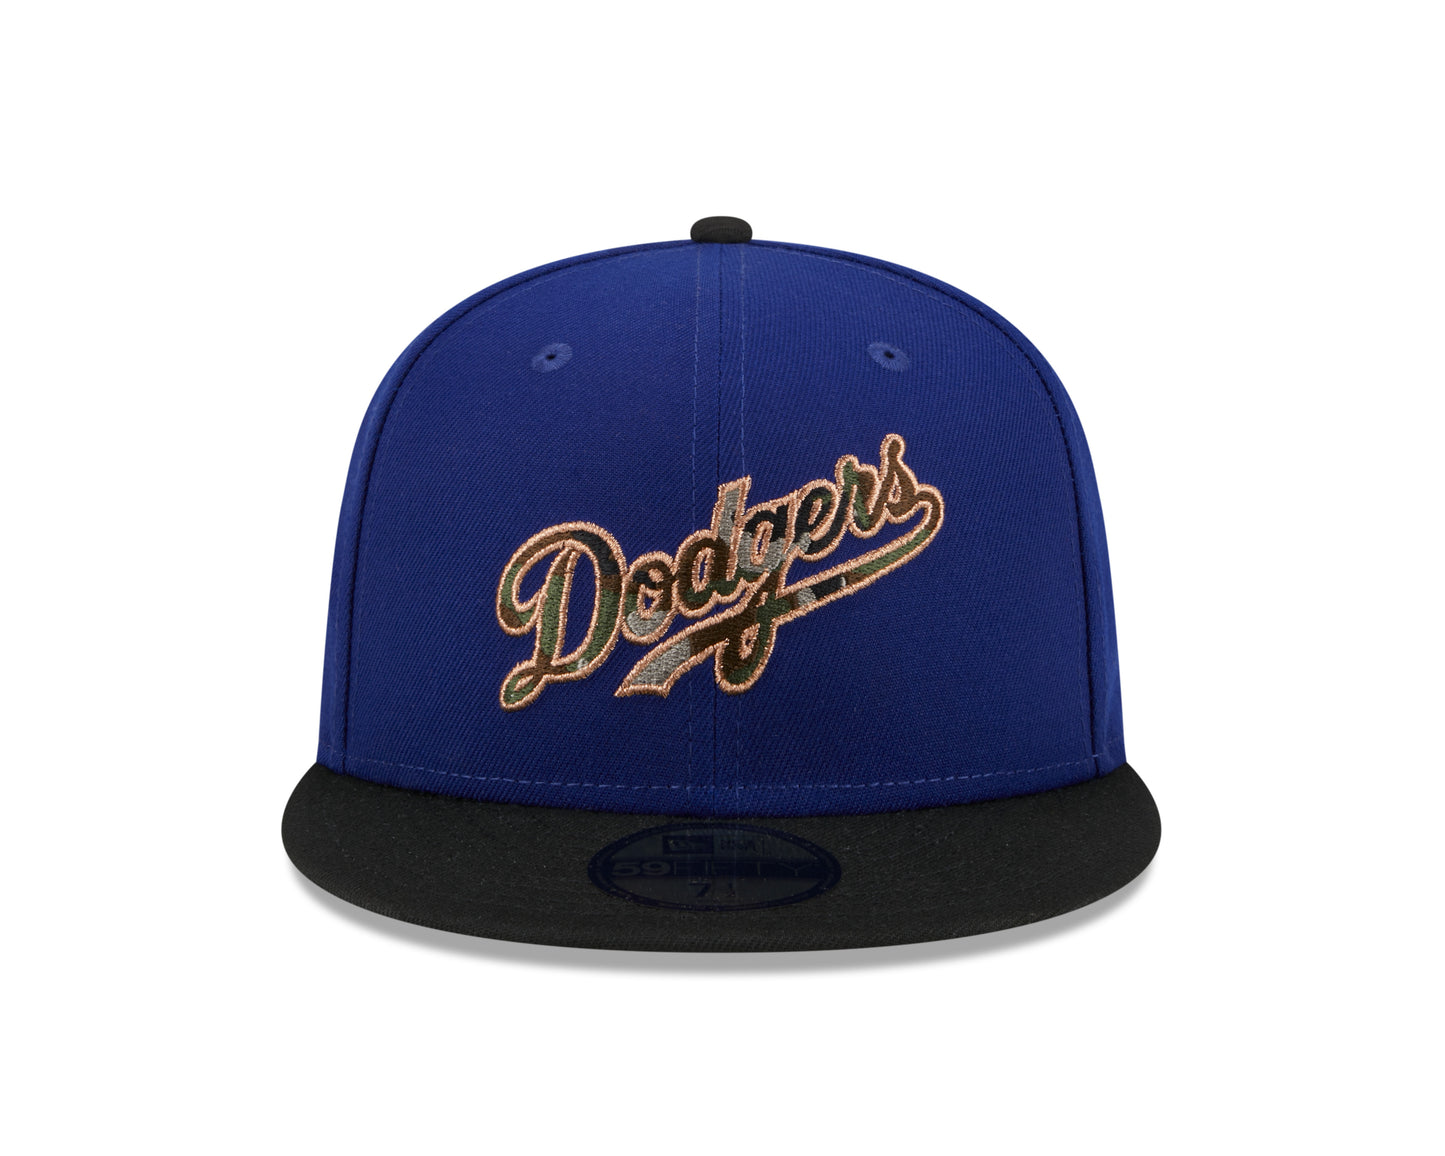 New Era - CAMO FILL - 59fifty Fitted Cap - Los Angeles Dodgers - Blue - Headz Up 